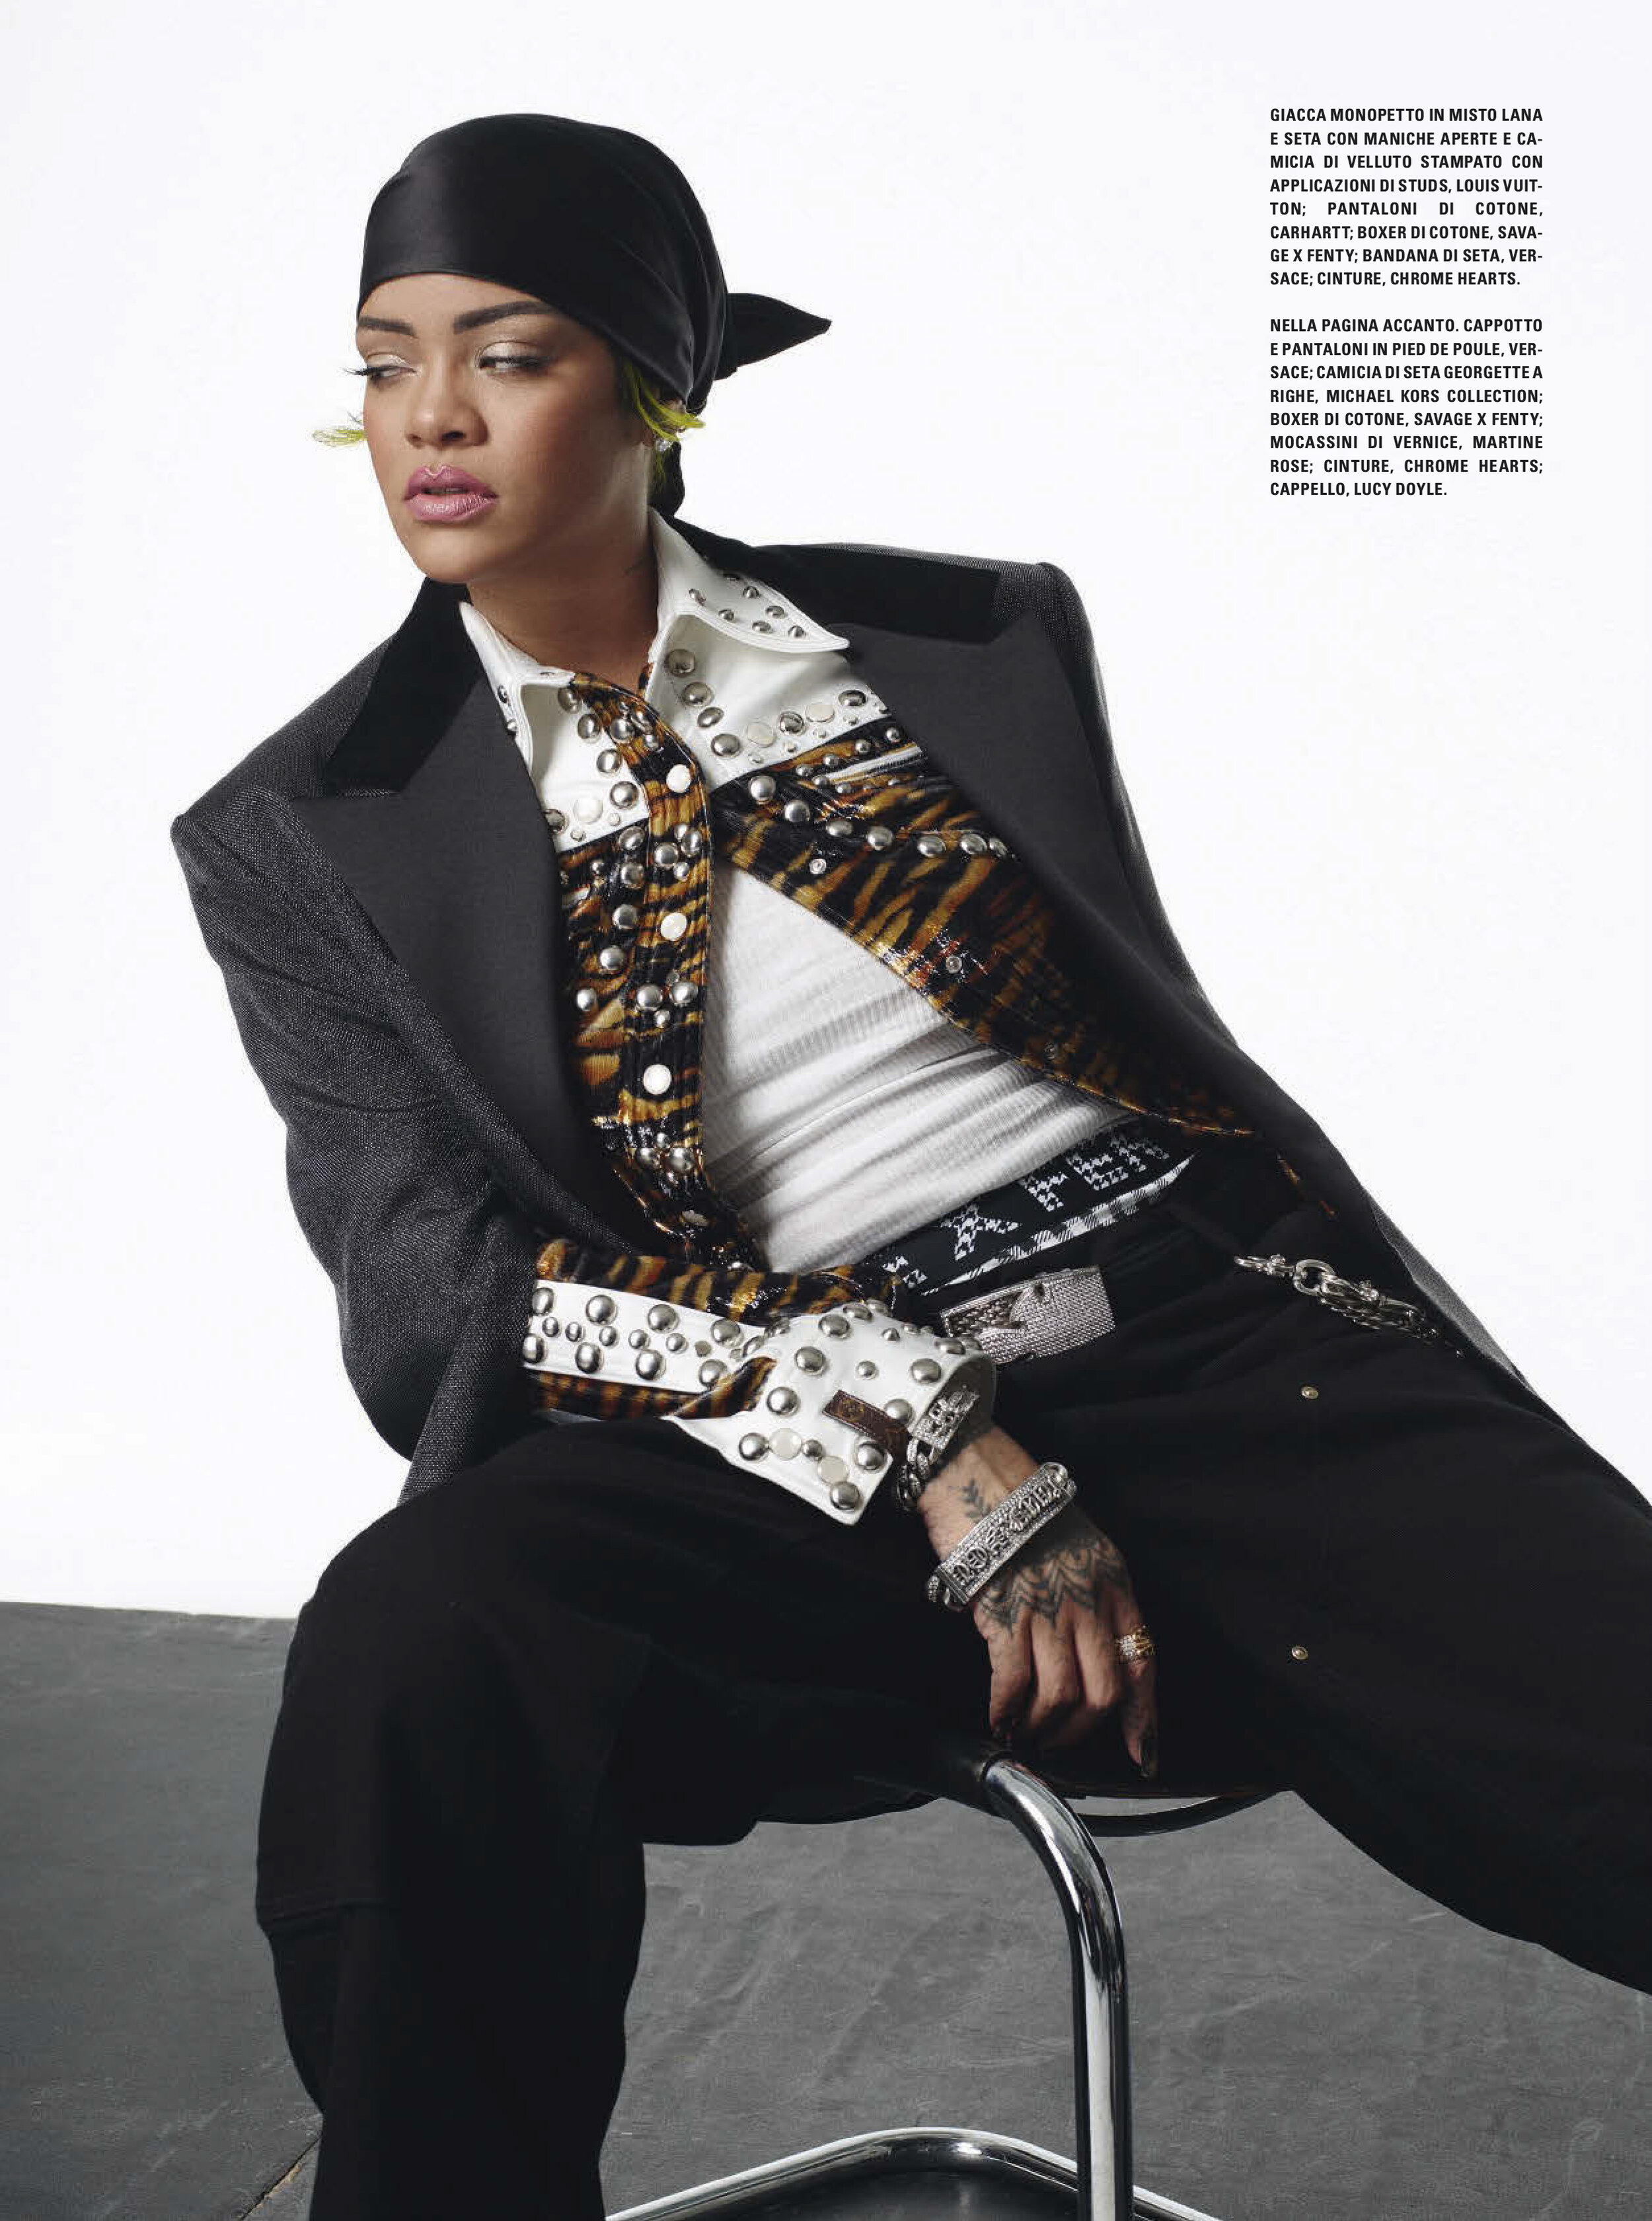 Rihanna - Rising from - Image 1 from Vogue Magazine's Black Cover